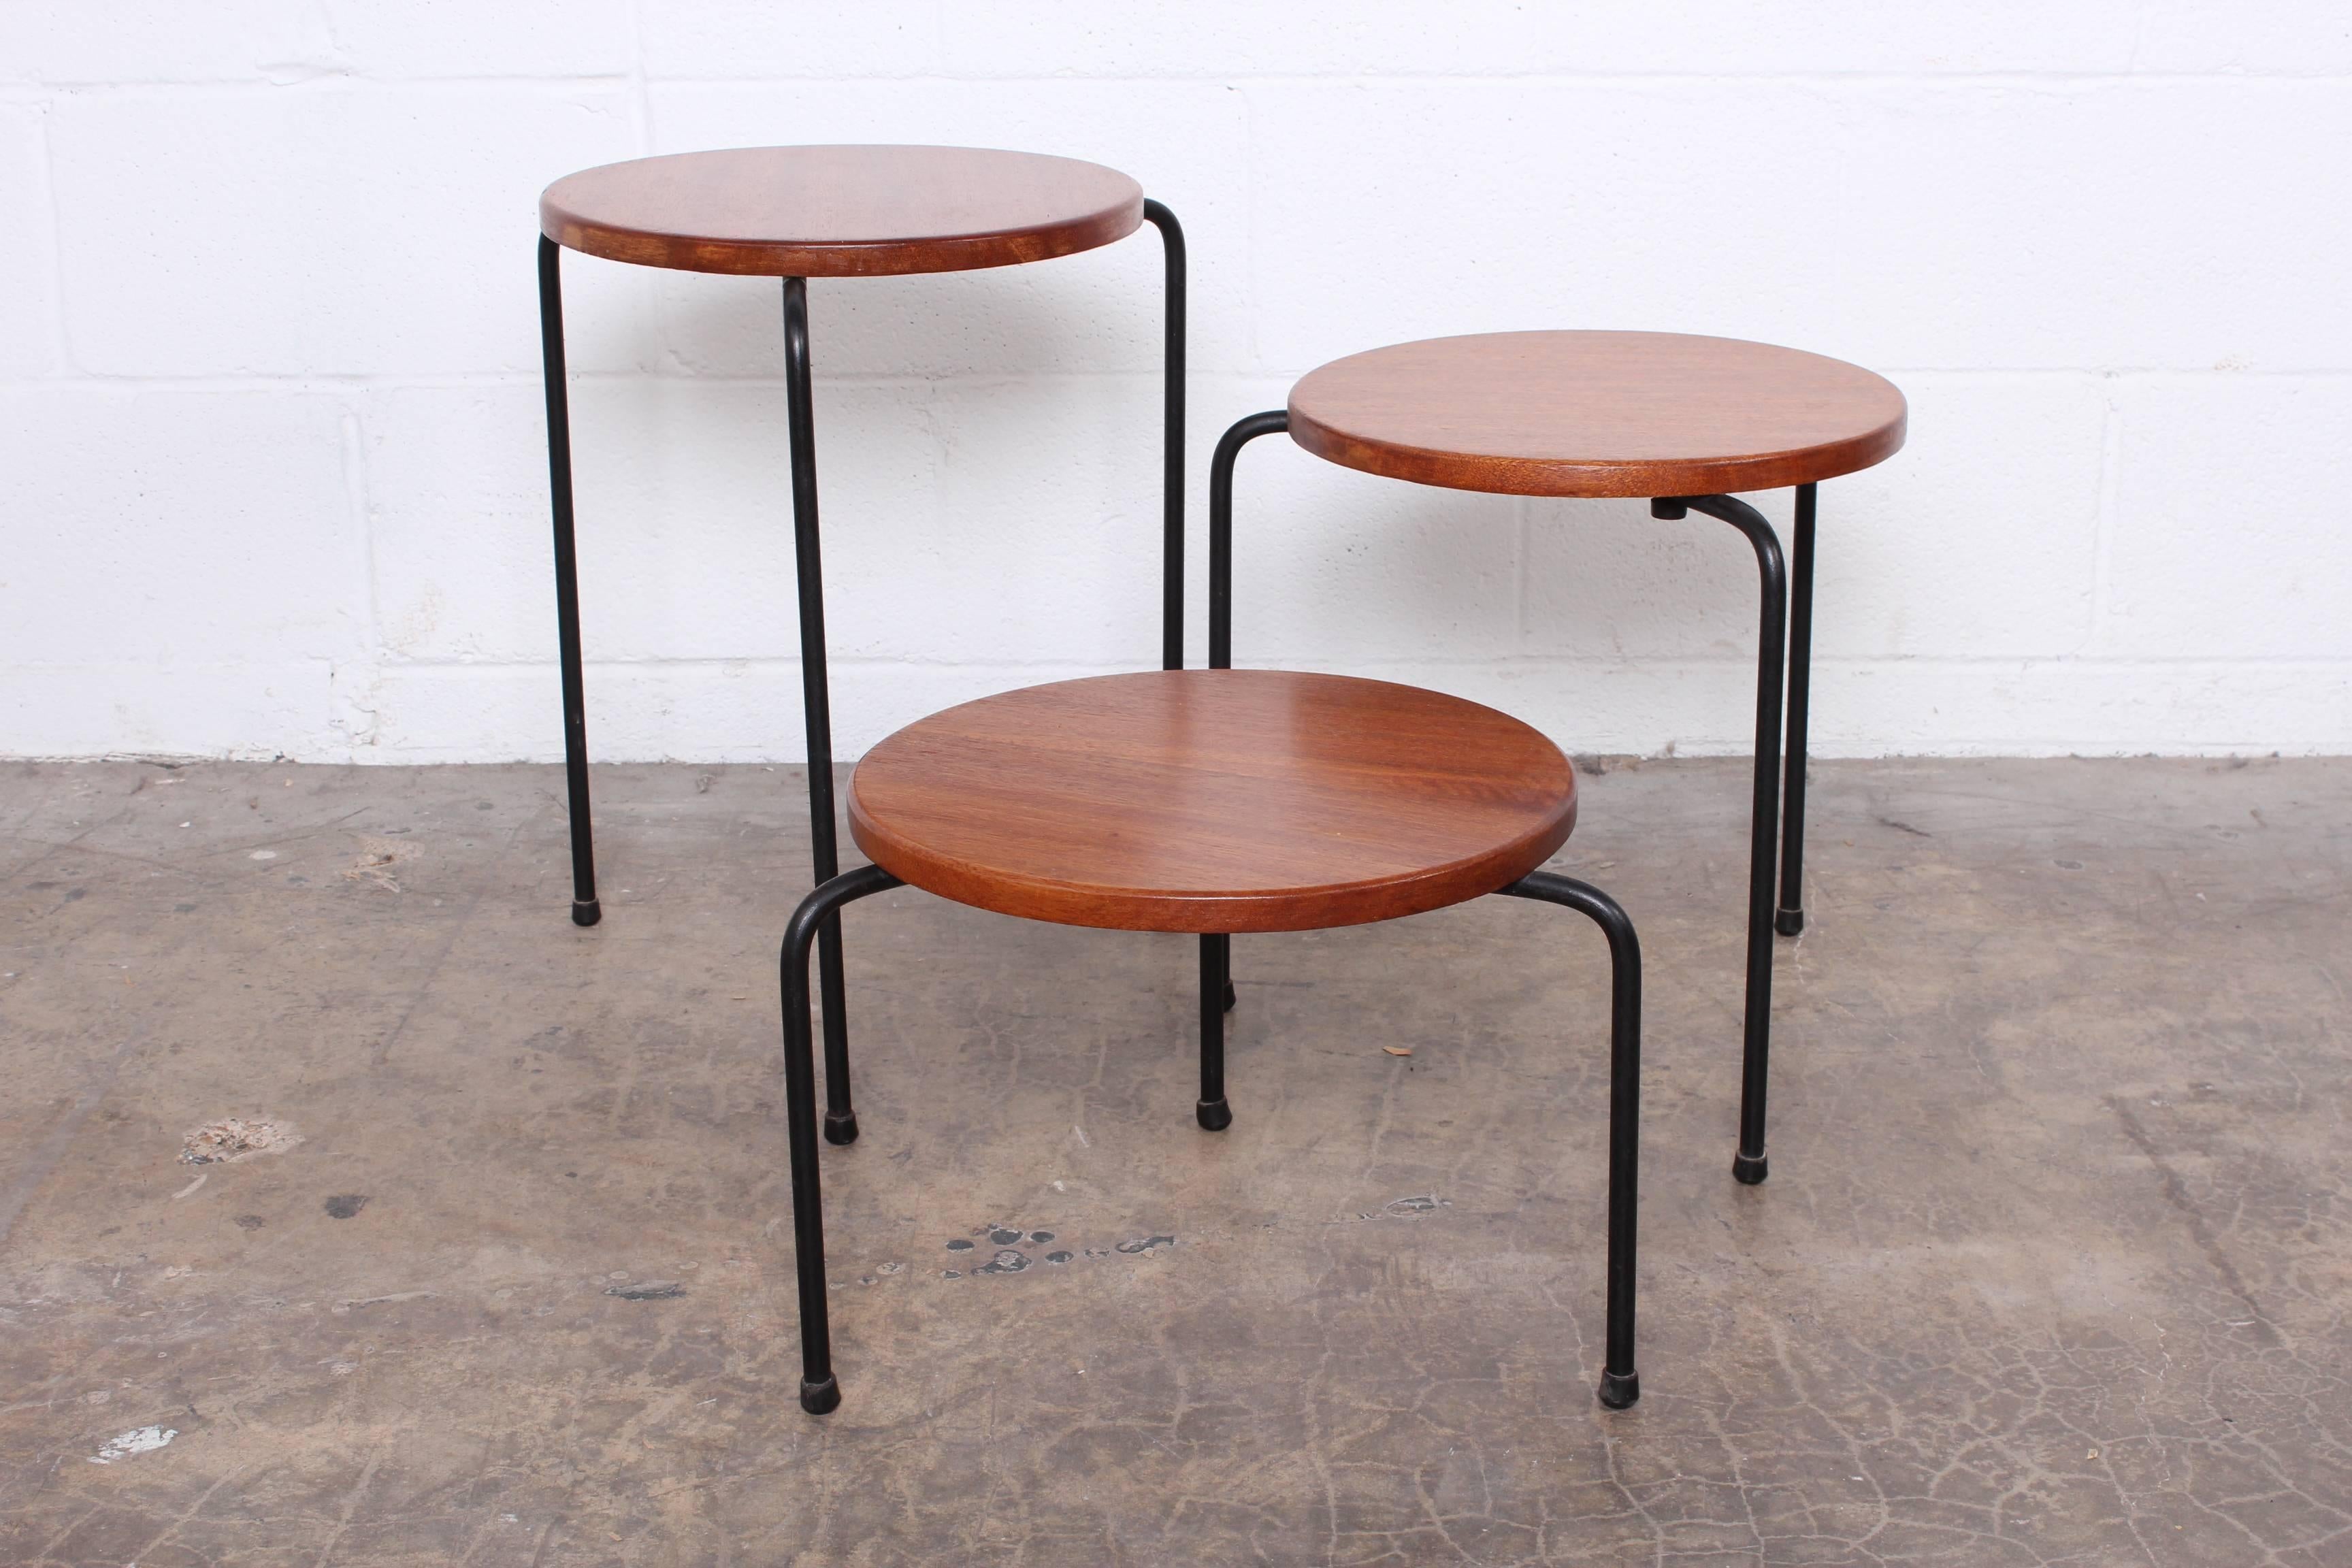 A set of three mahogany and iron nesting tables designed by Luther Conover.